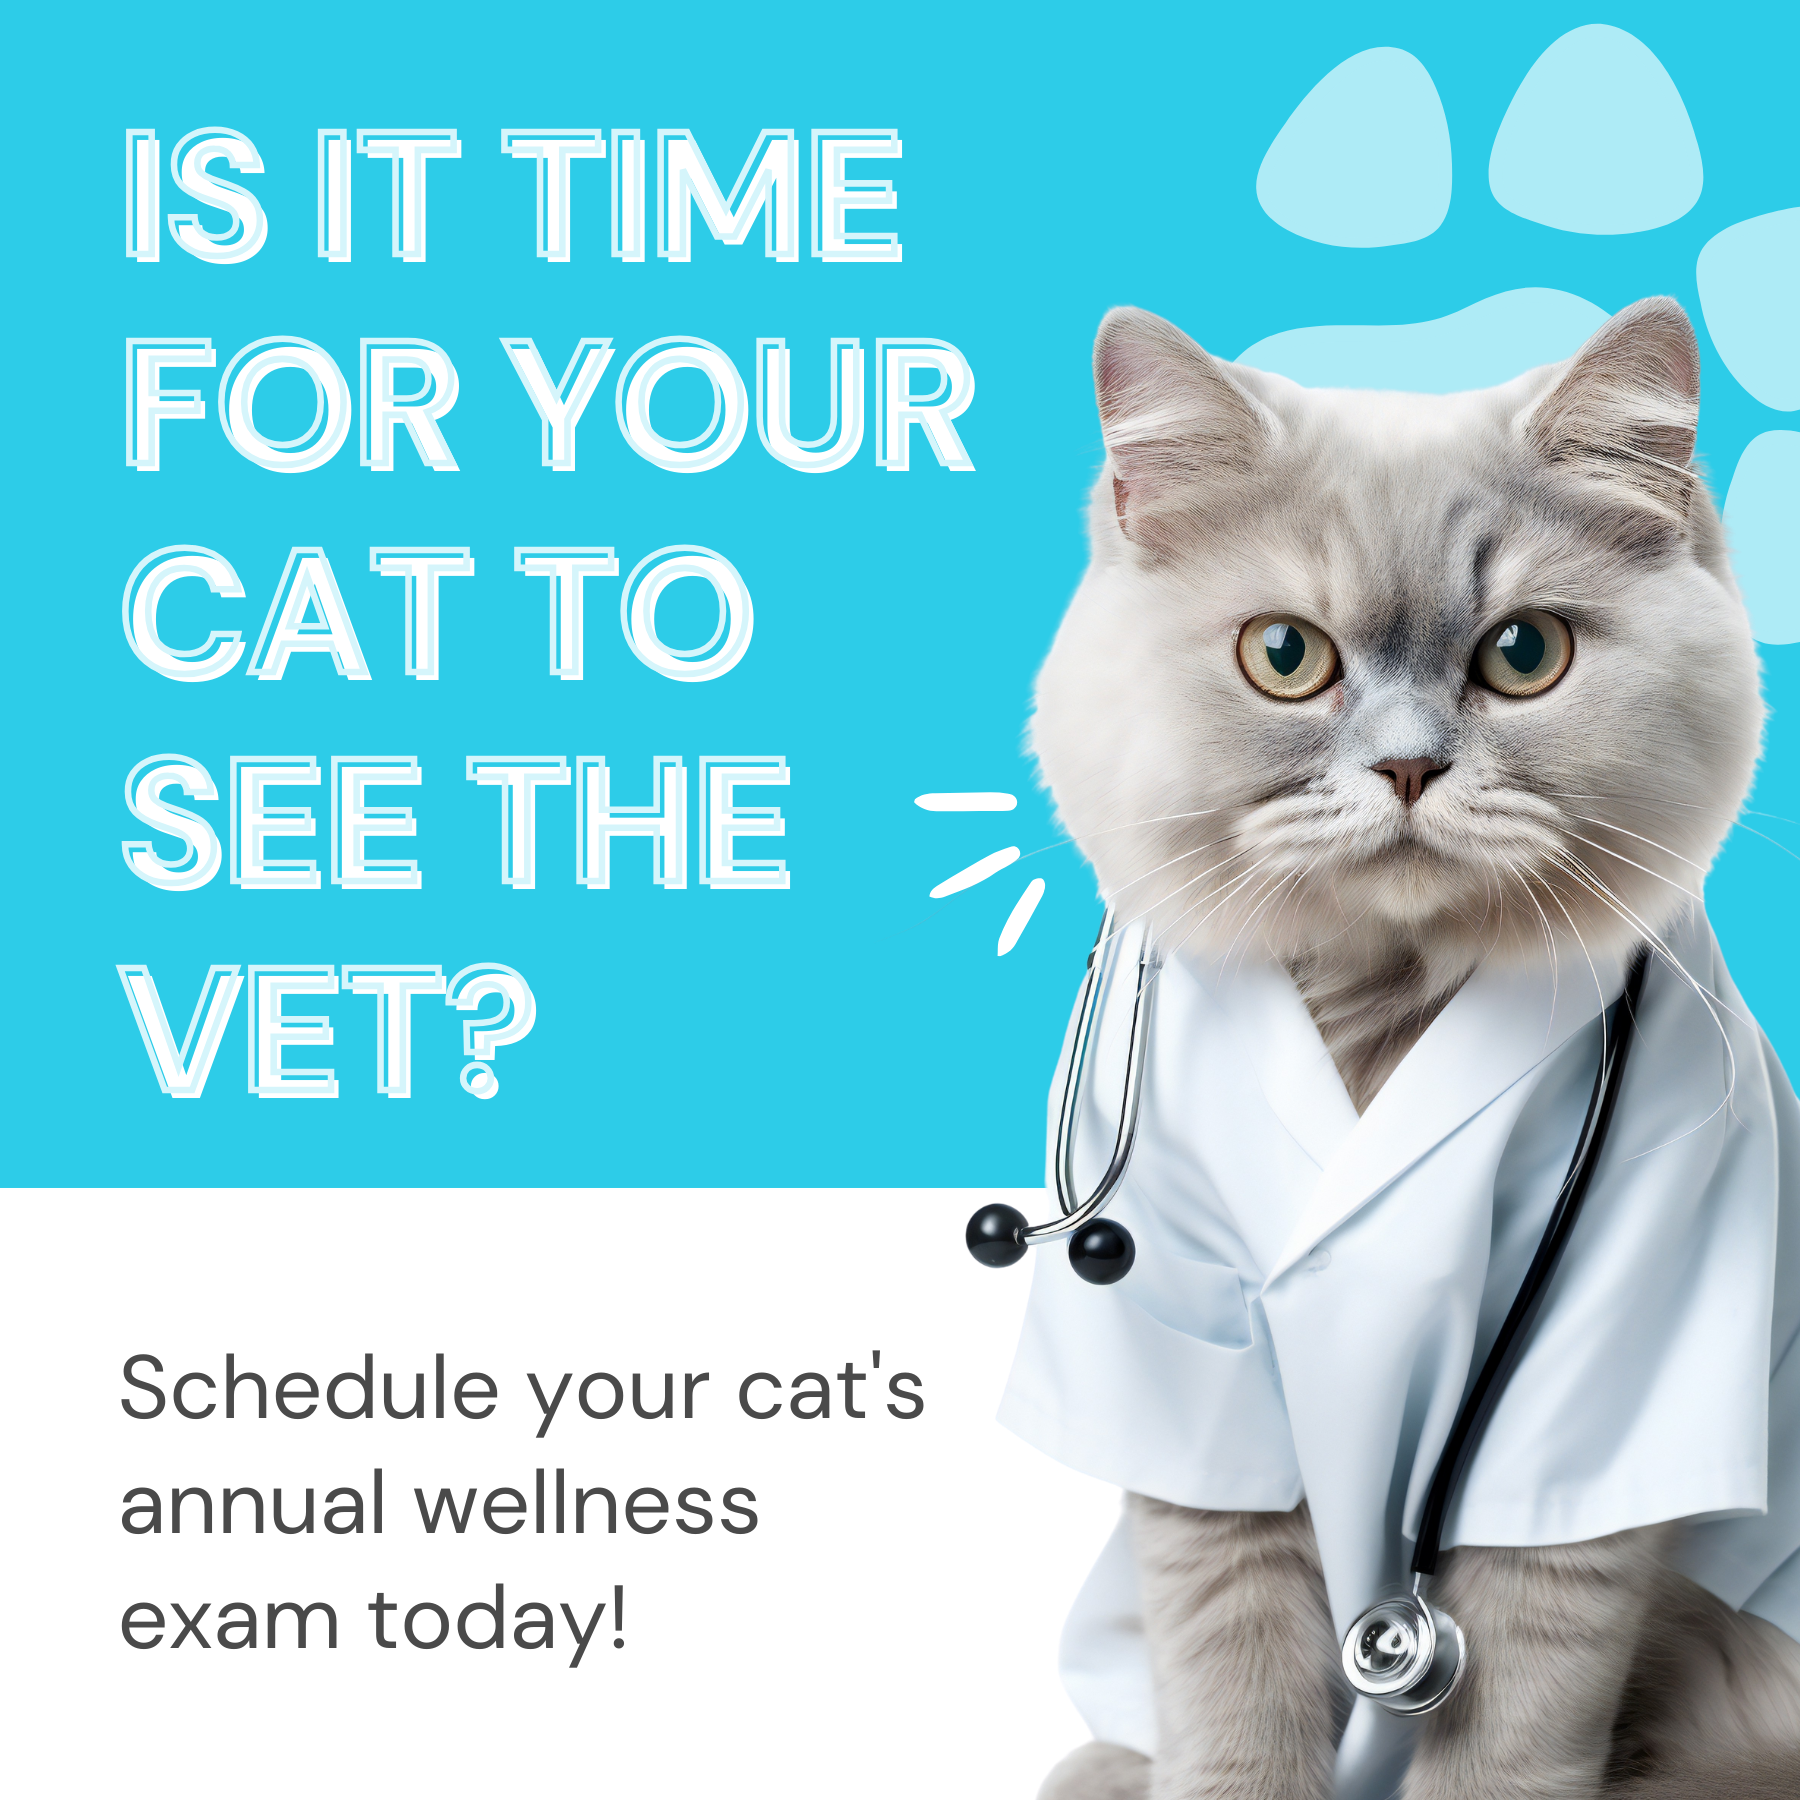 Is it time for your cat to see the vet?